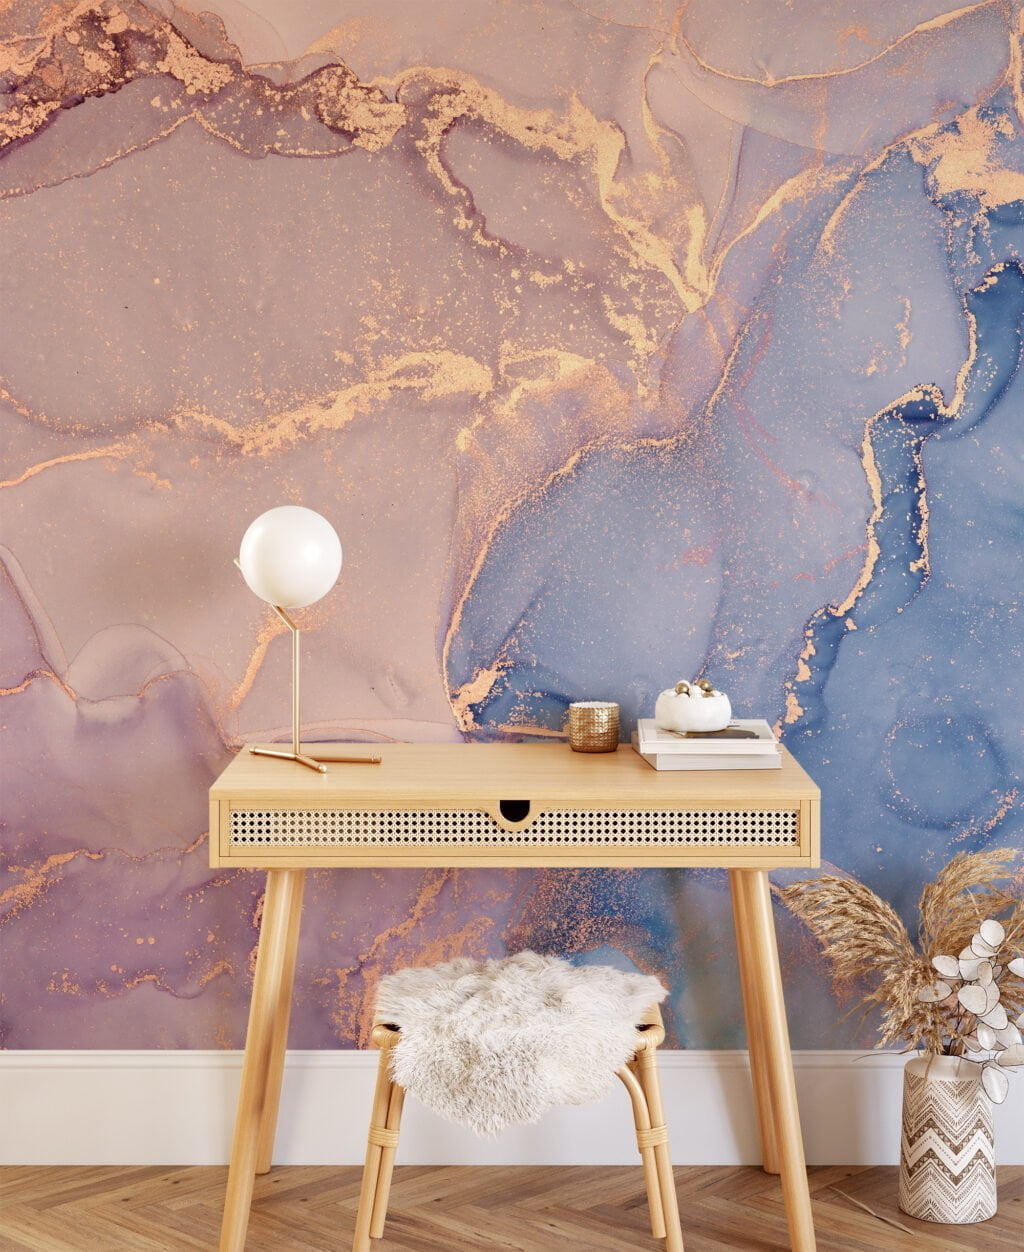 Opulent Pastel Colored Marble Texture Wallpaper for a Luxurious and Sophisticated Home Decor